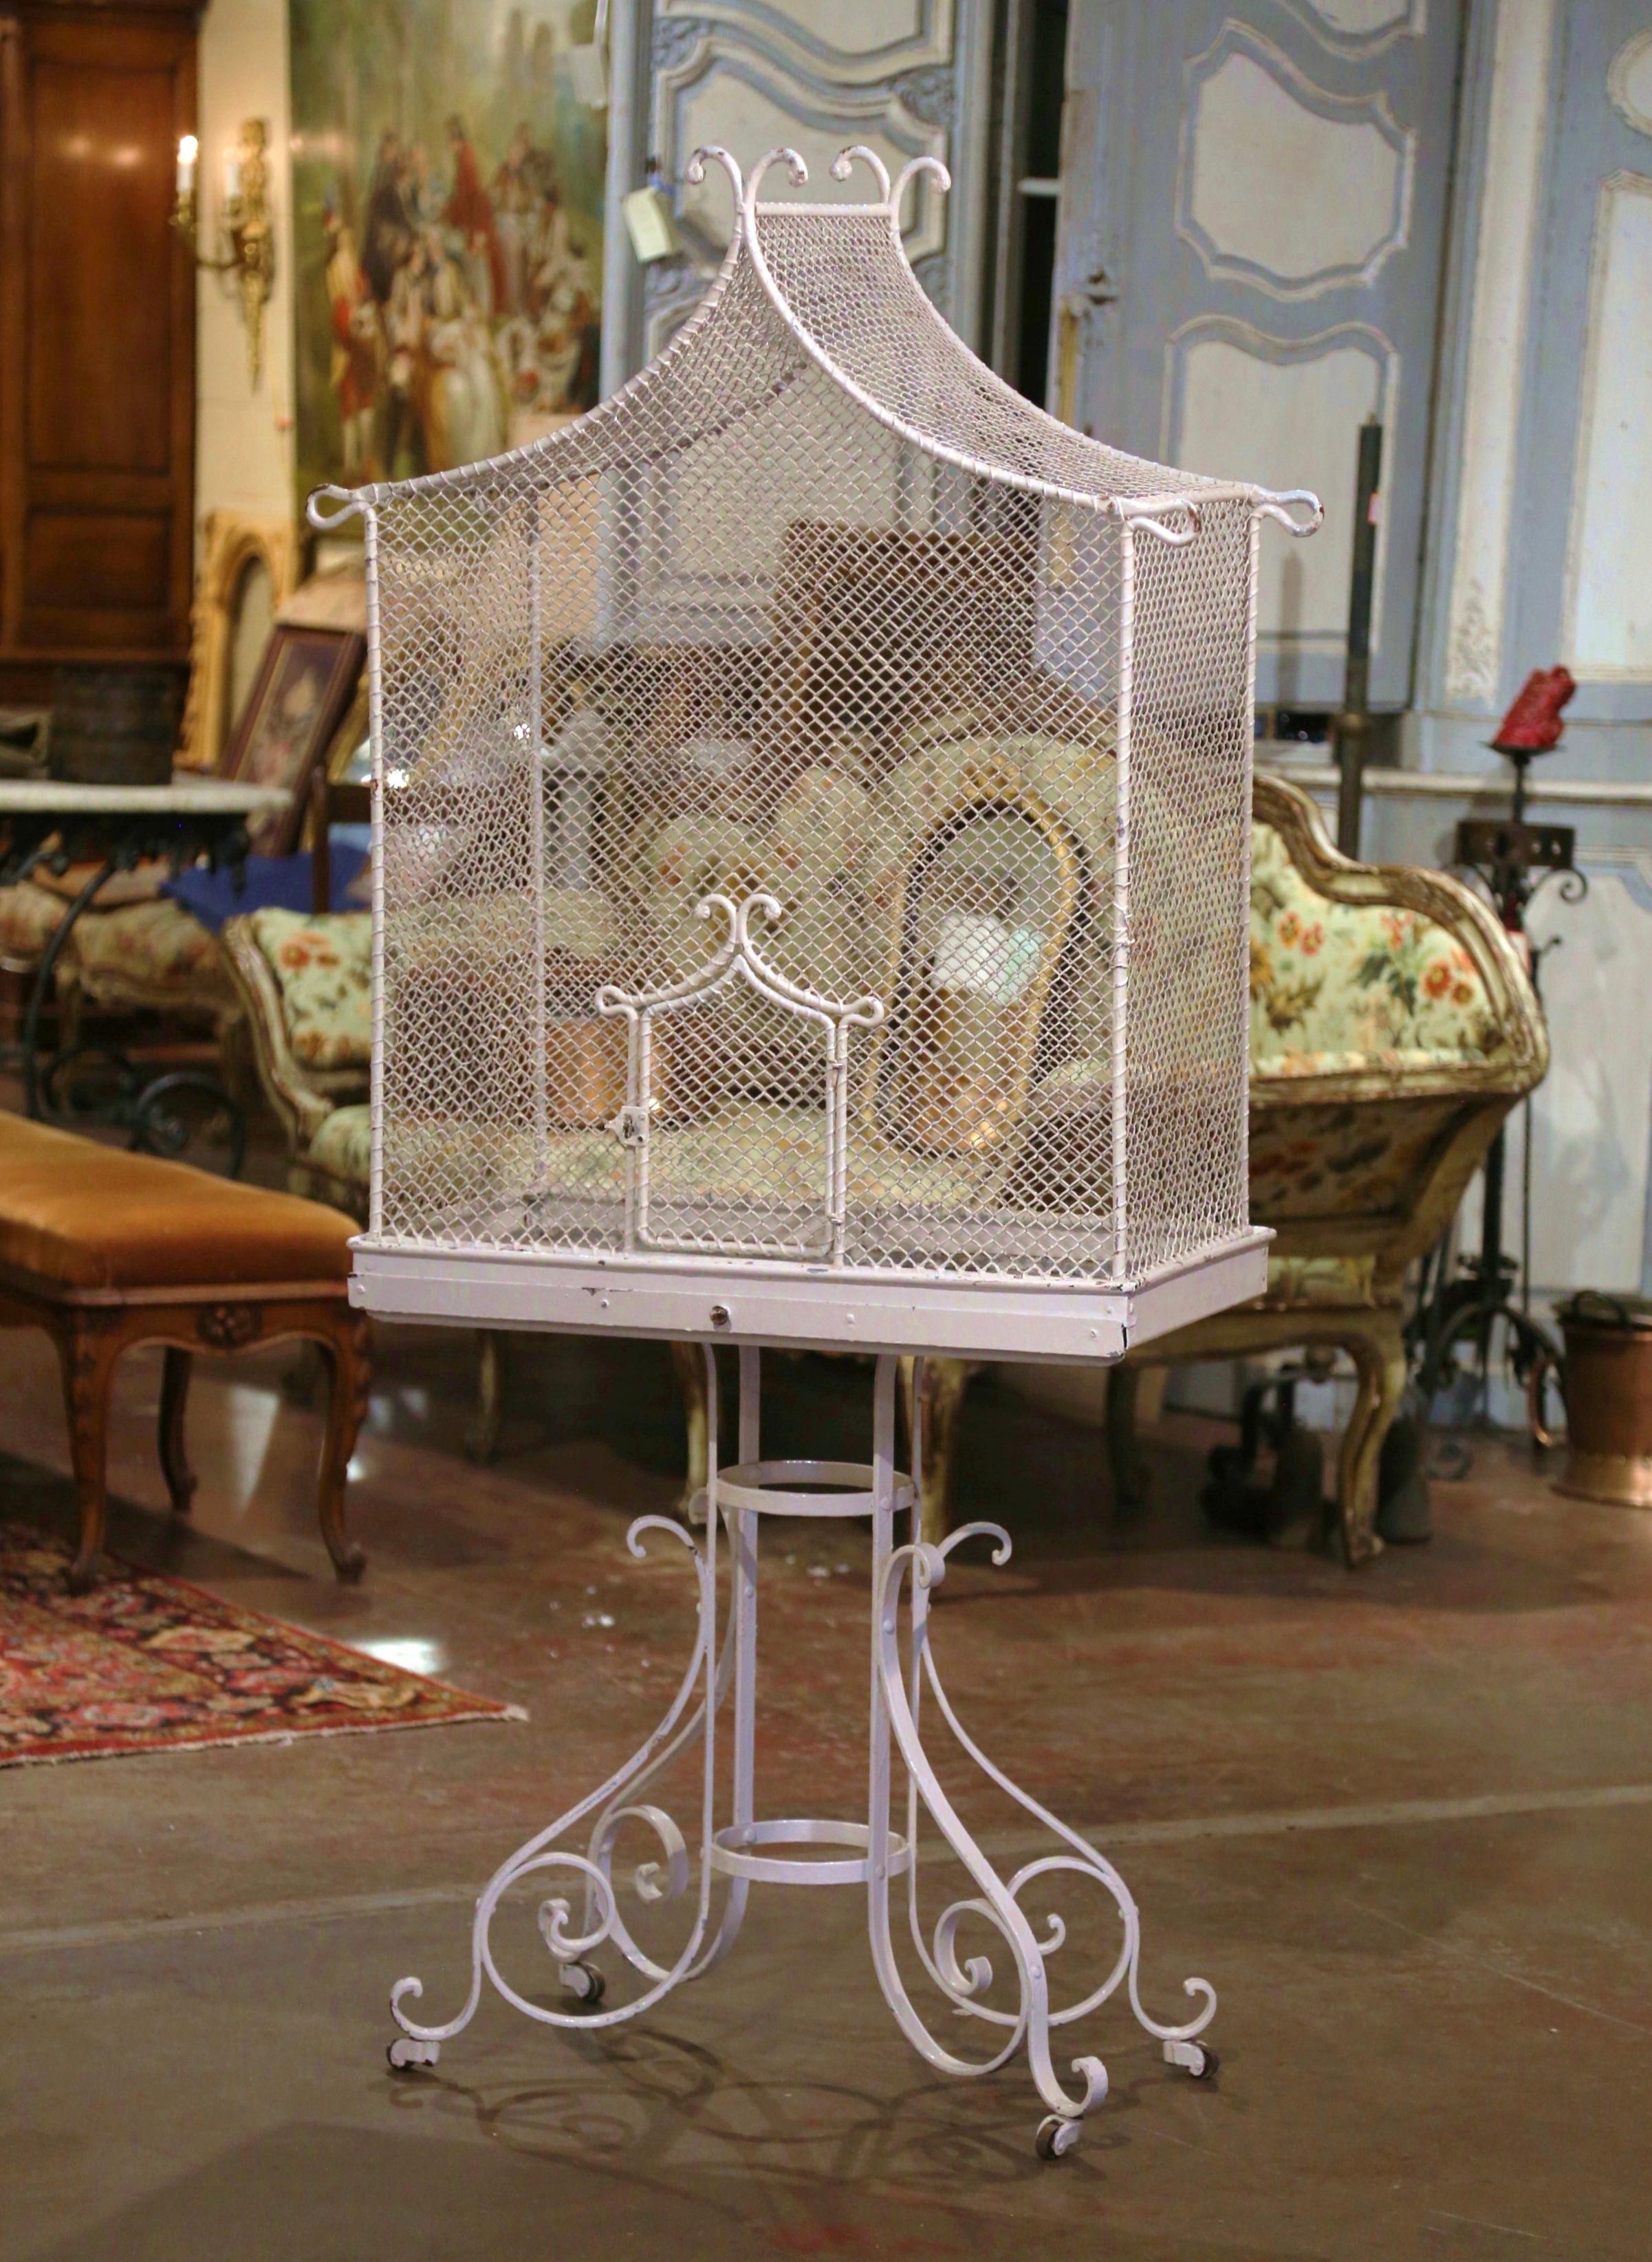 Add color and whimsical charm to your kitchen or breakfast room with this large antique aviary bird cage. Crafted in France circa 1920 and built in two pieces (base and house), the six foot free standing bird house stands on four intricate iron